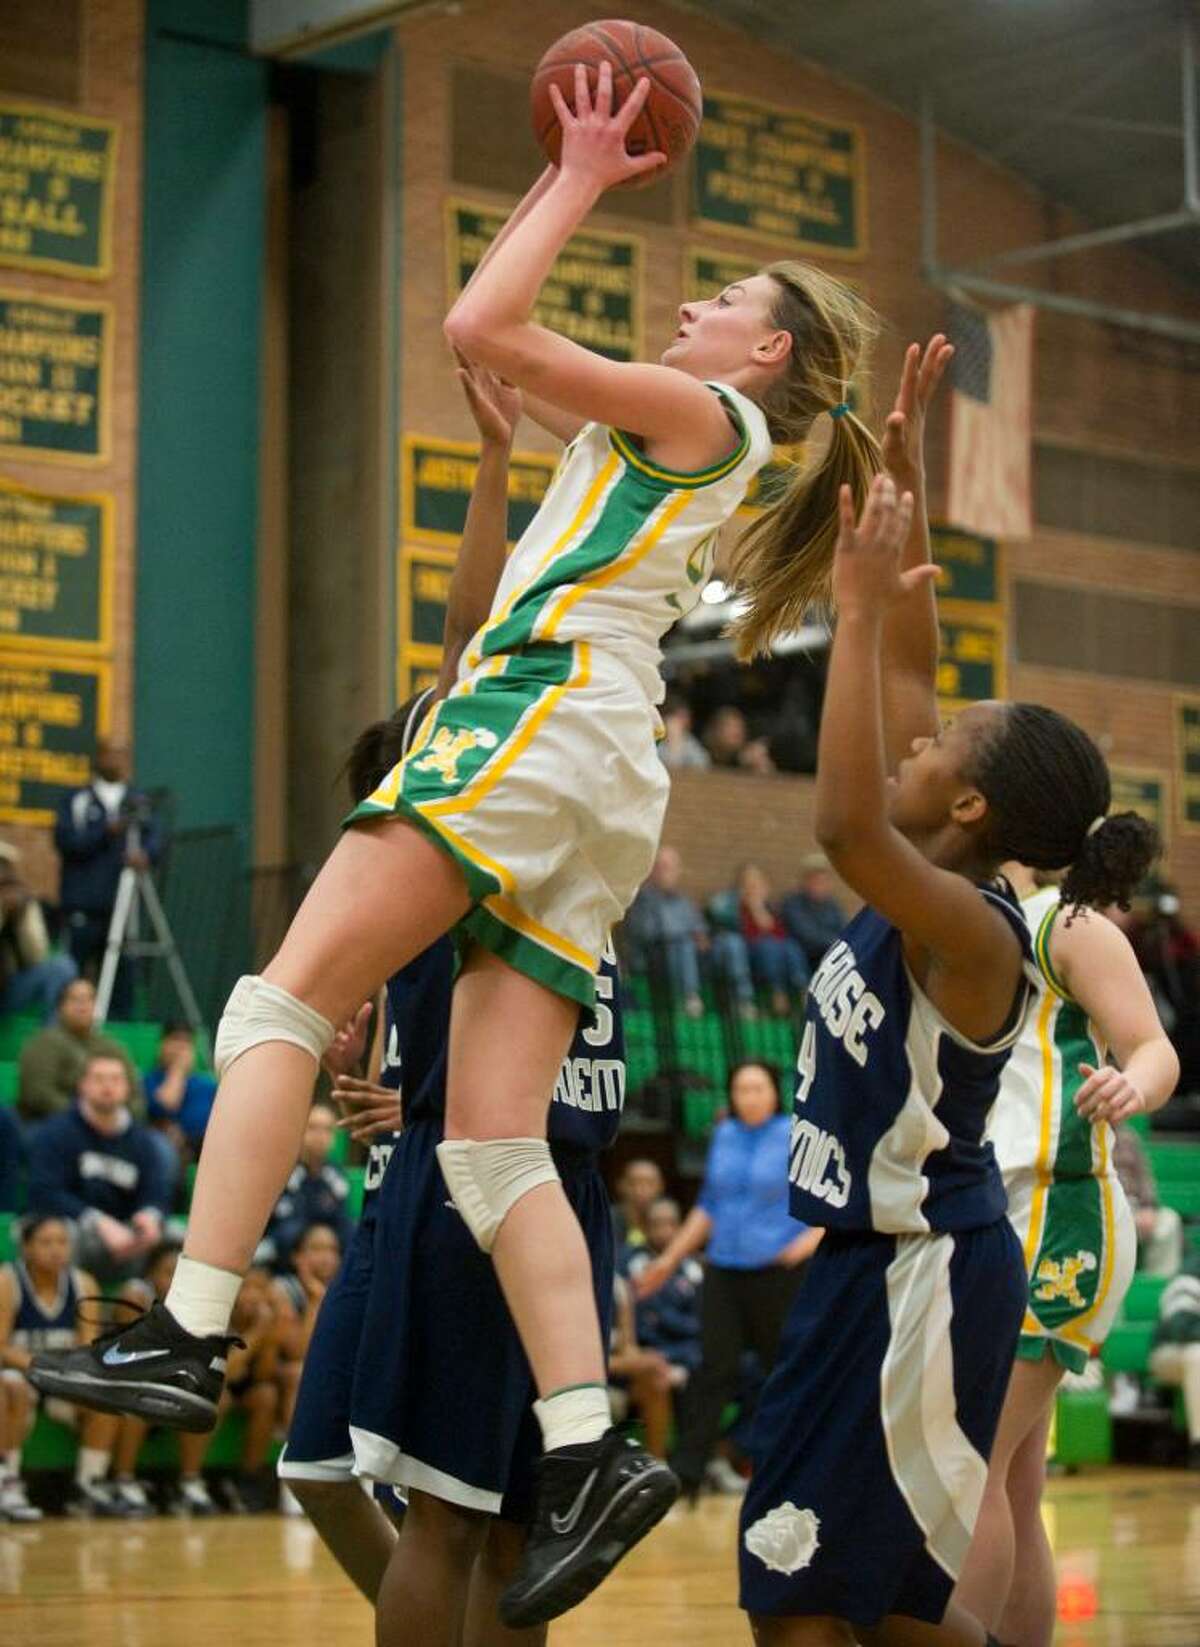 Trinity's Mackenzie Griffin, left, shoots over Hillhouse's Janaya Bradley, right, during the second round of the girls CIAC basketball tournament at Trinity Catholic High School in Stamford, Conn. on Thursday, March 4, 2010. Trinity lost to Hillhouse 61-46.